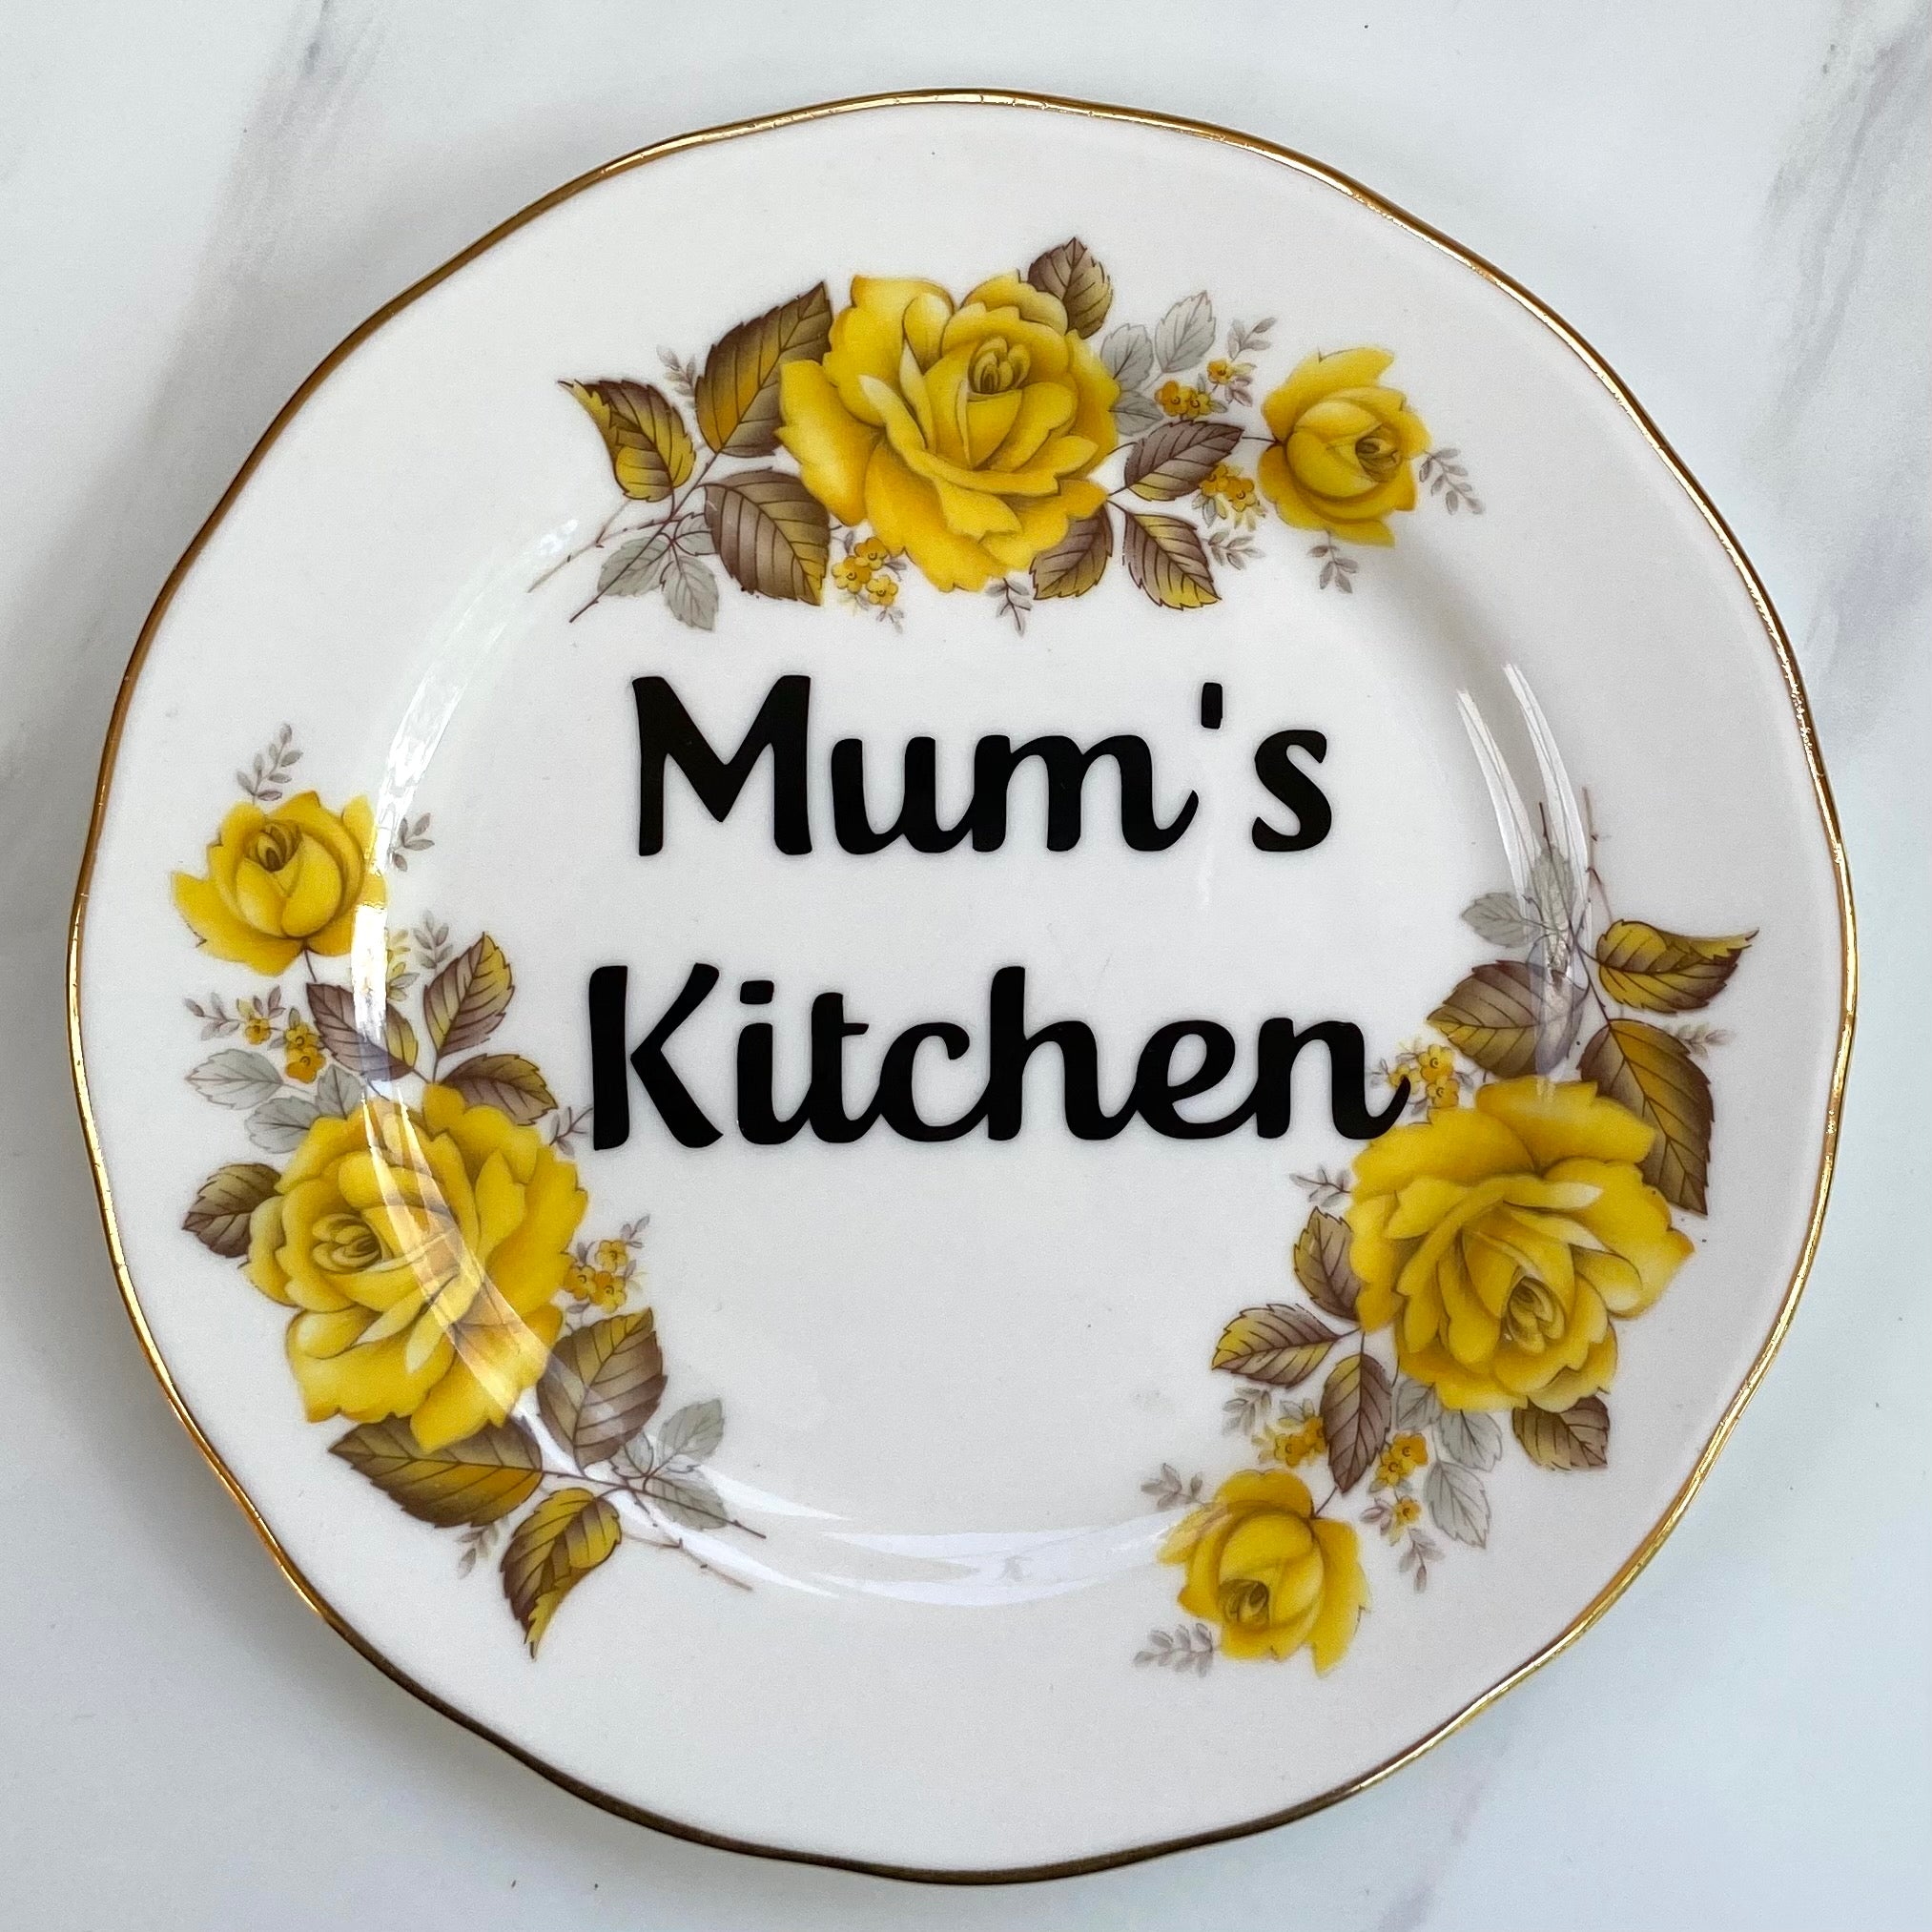 ‘Mum’s kitchen’ quote on plate